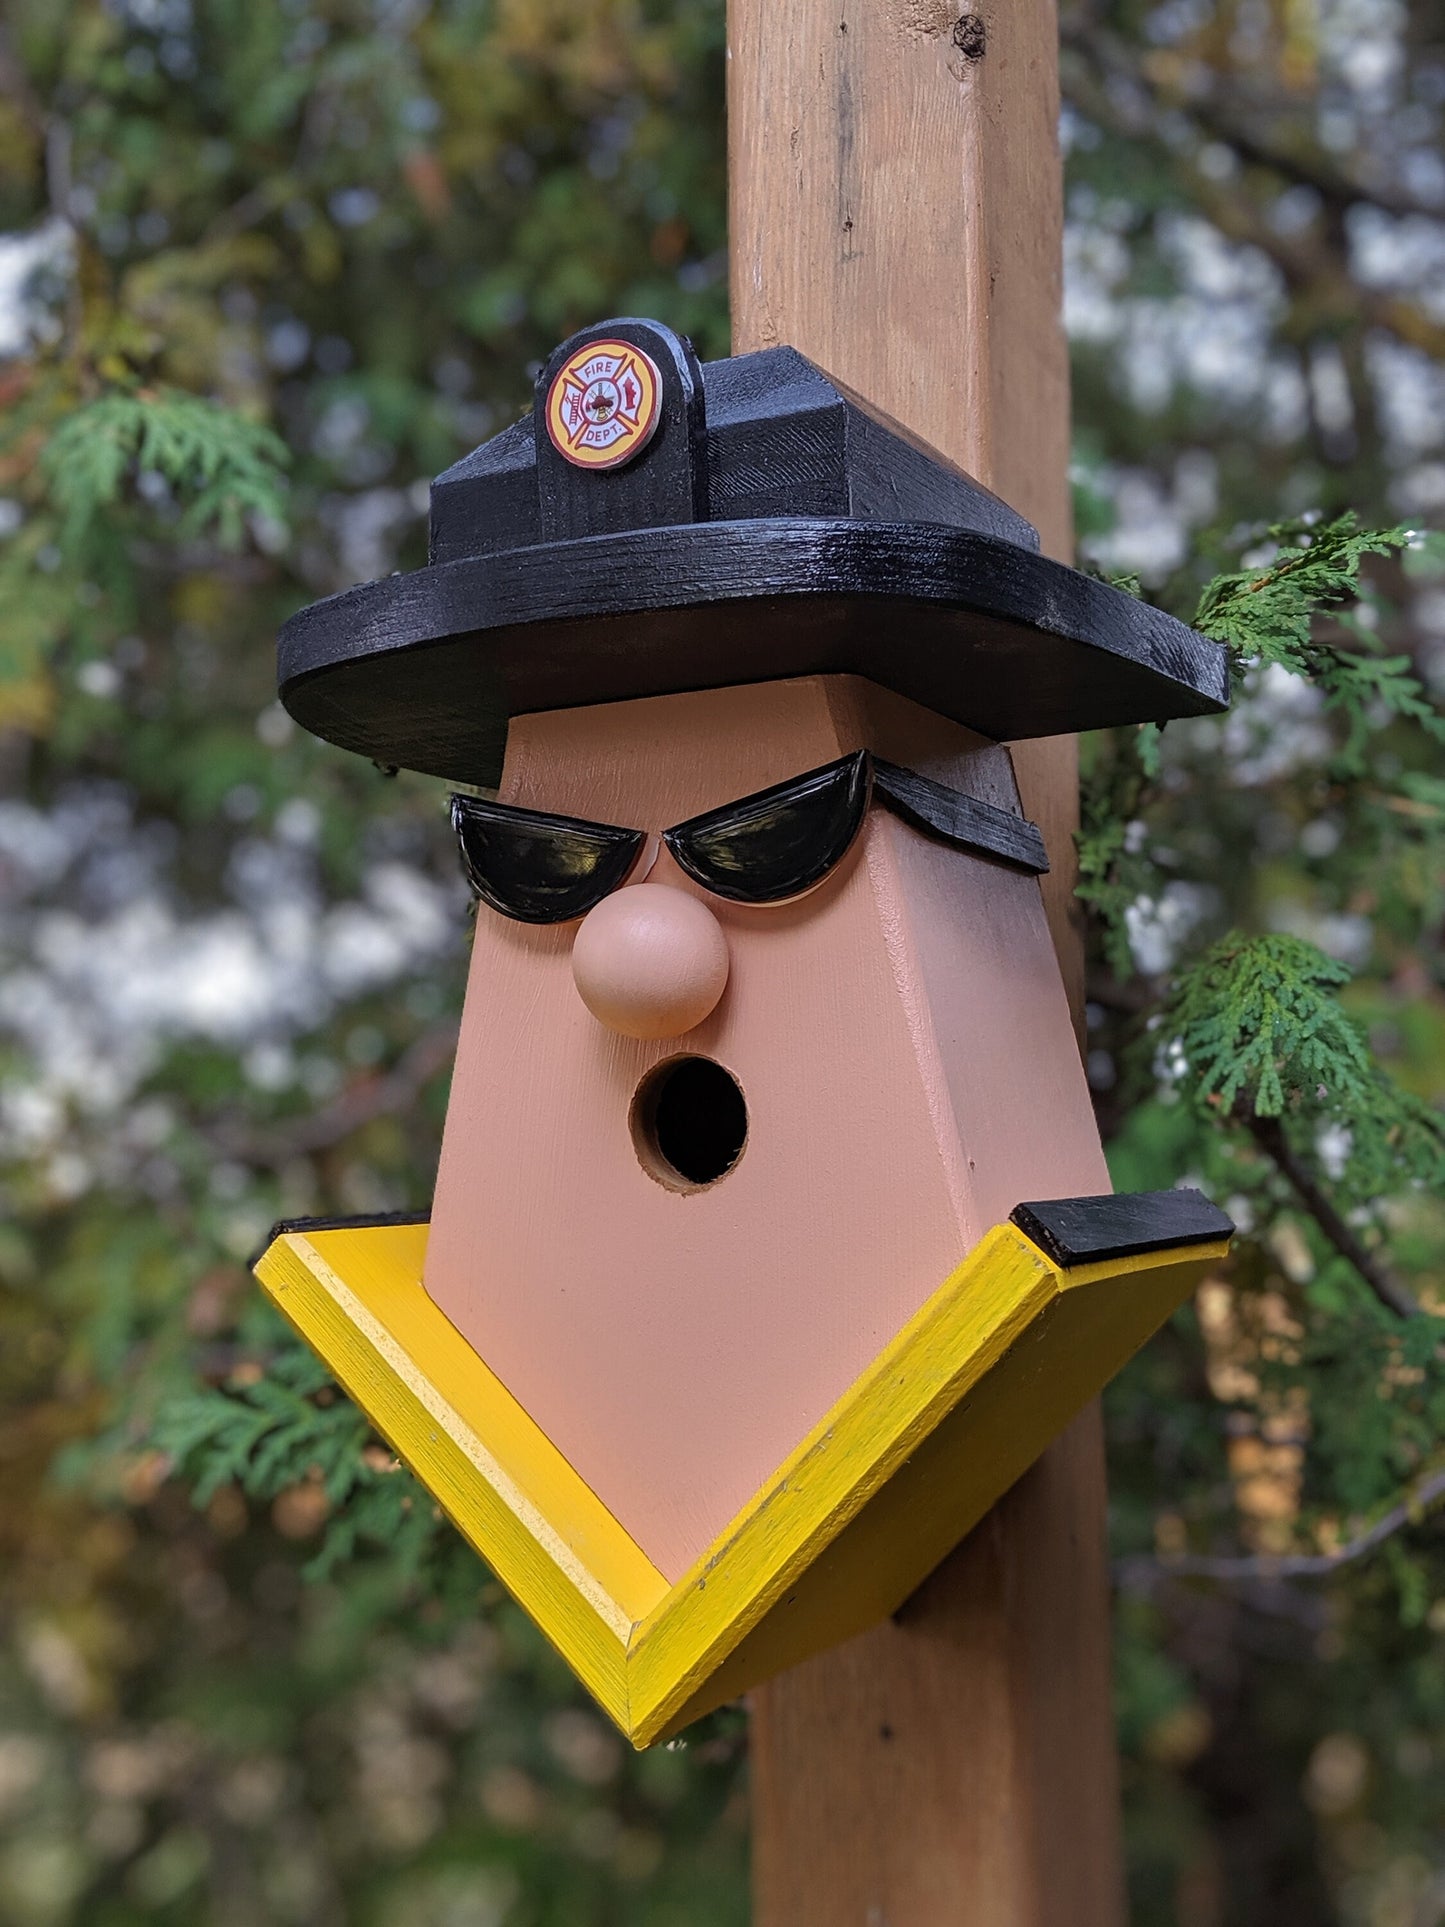 Fire Fighter with Sunglasses Birdhouse